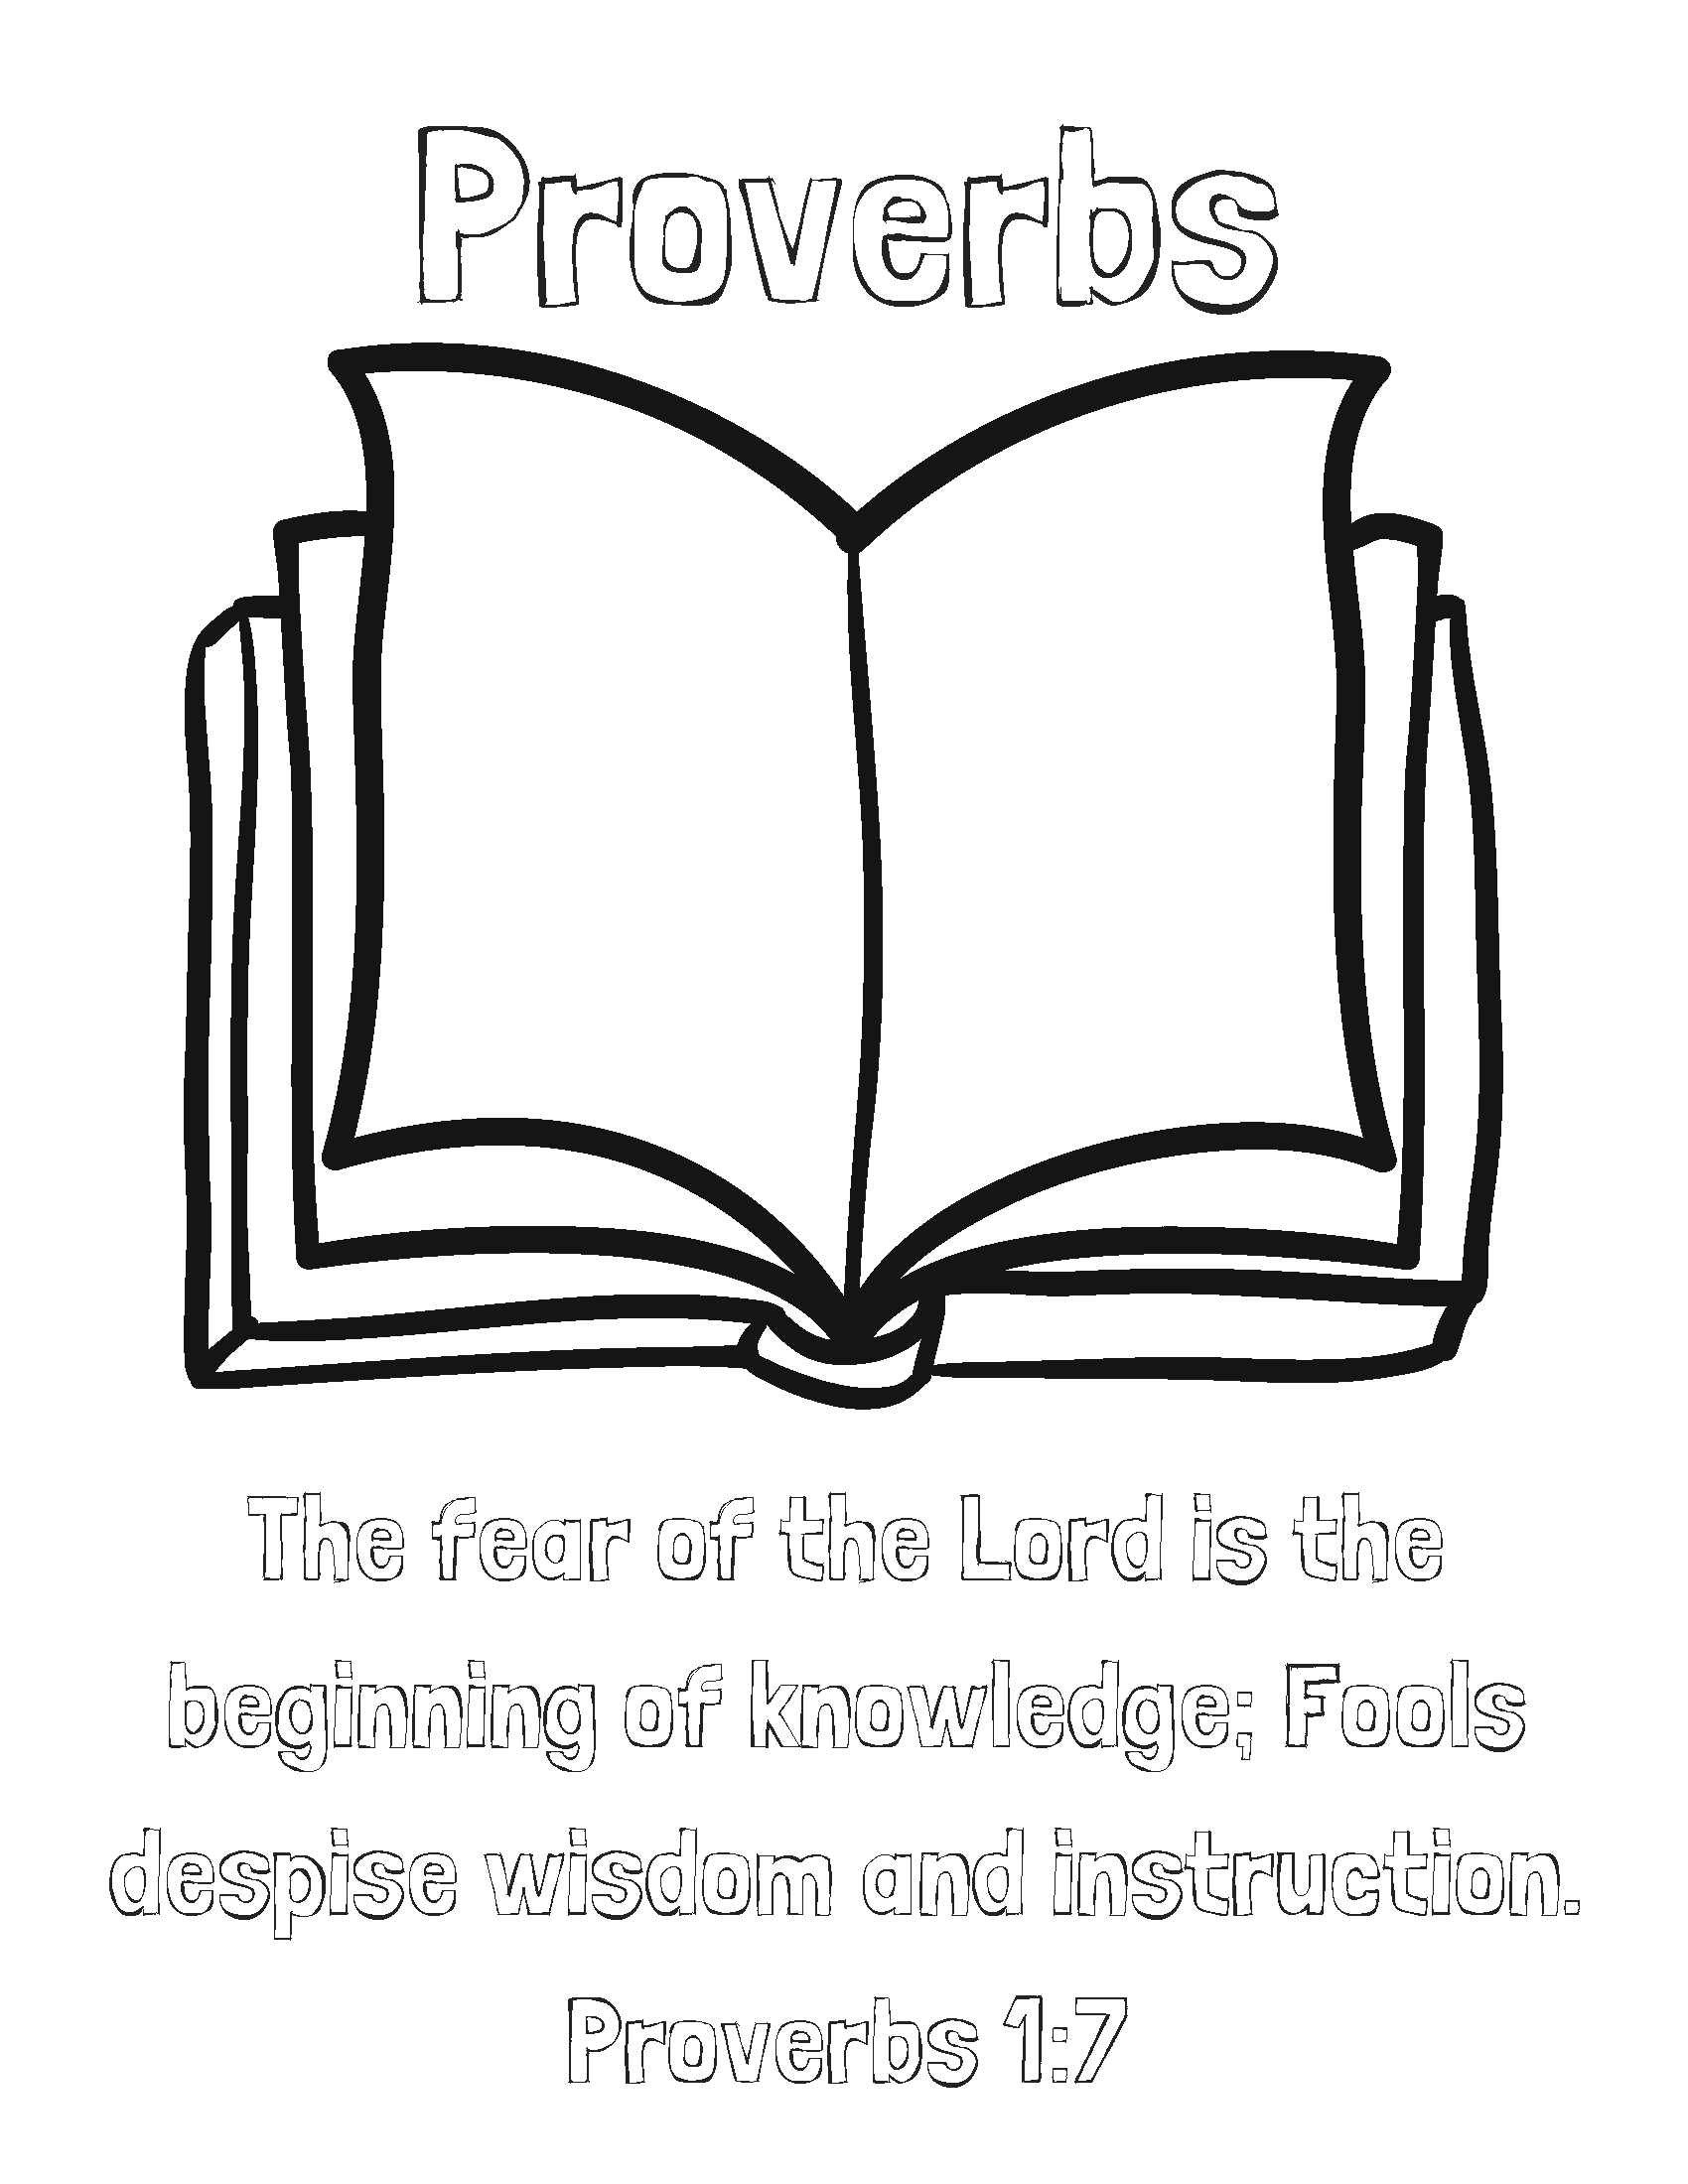 LWS+Proverbs+1+Coloring+Page.png